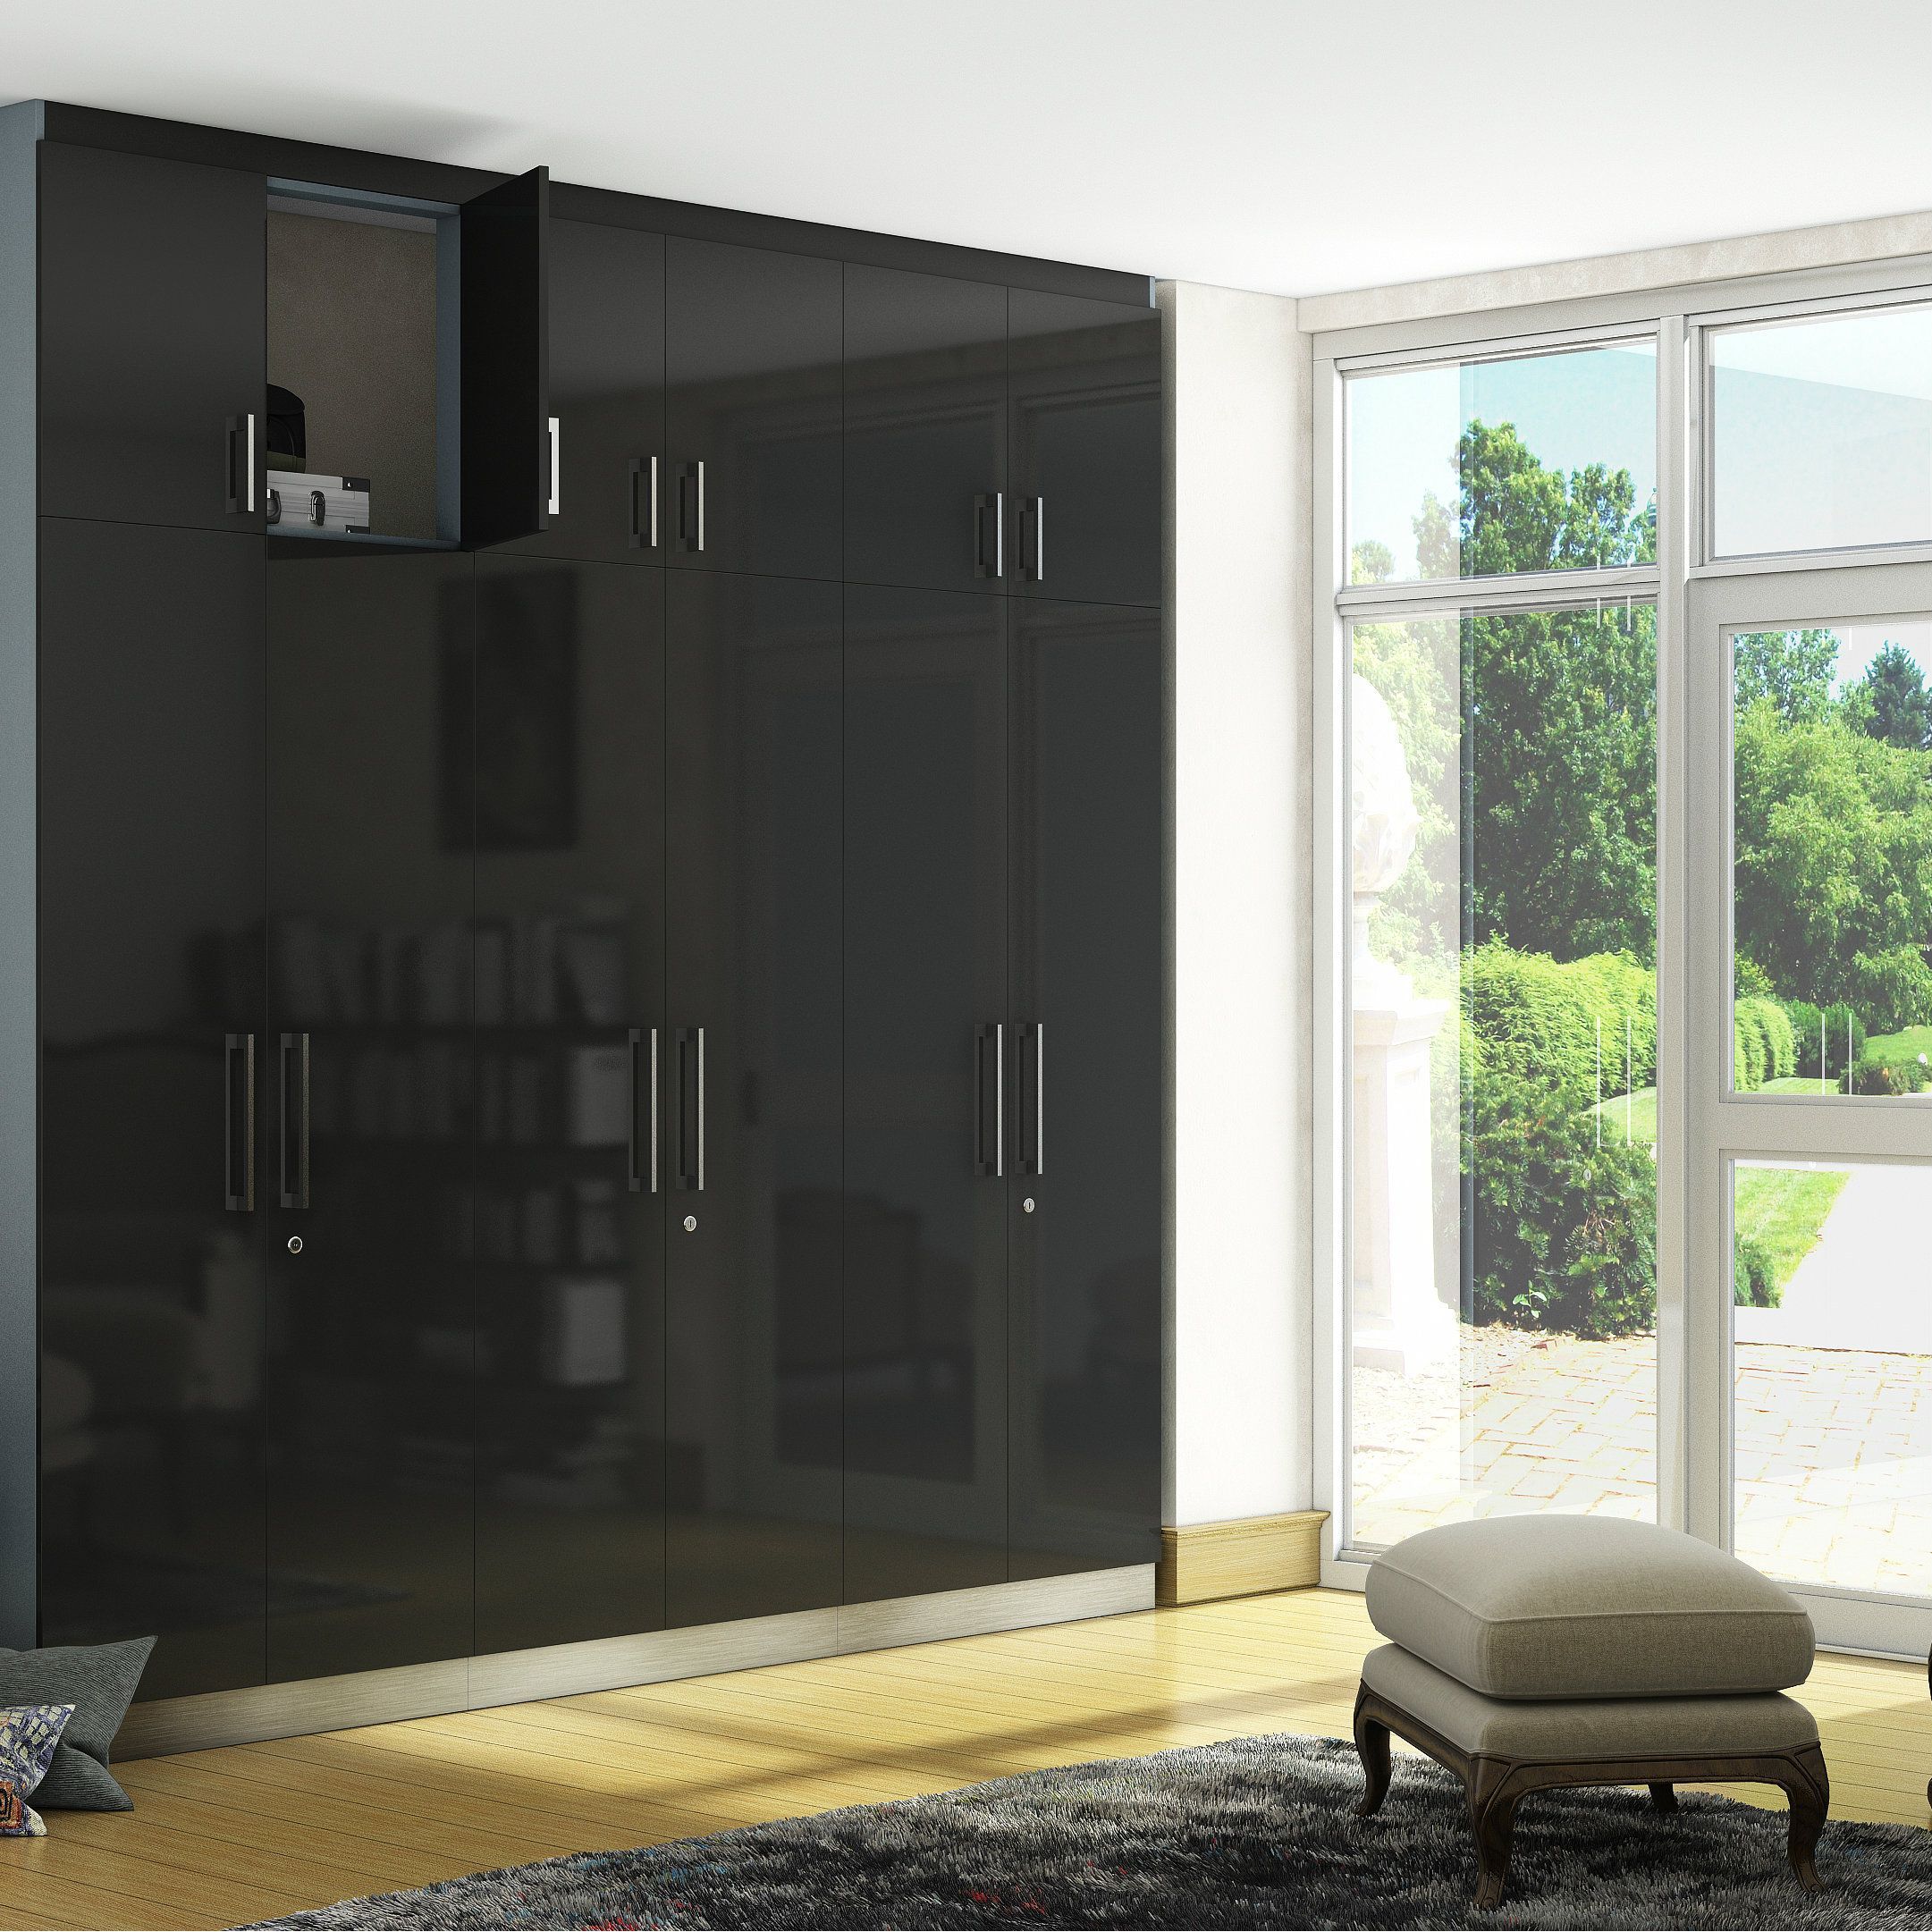 A Glossy Black Wardrobe That Is Every Bit As Impressive And Functional |  Wardrobe Design, Furniture Design, Grey Wardrobe For Black High Gloss Wardrobes (View 9 of 15)